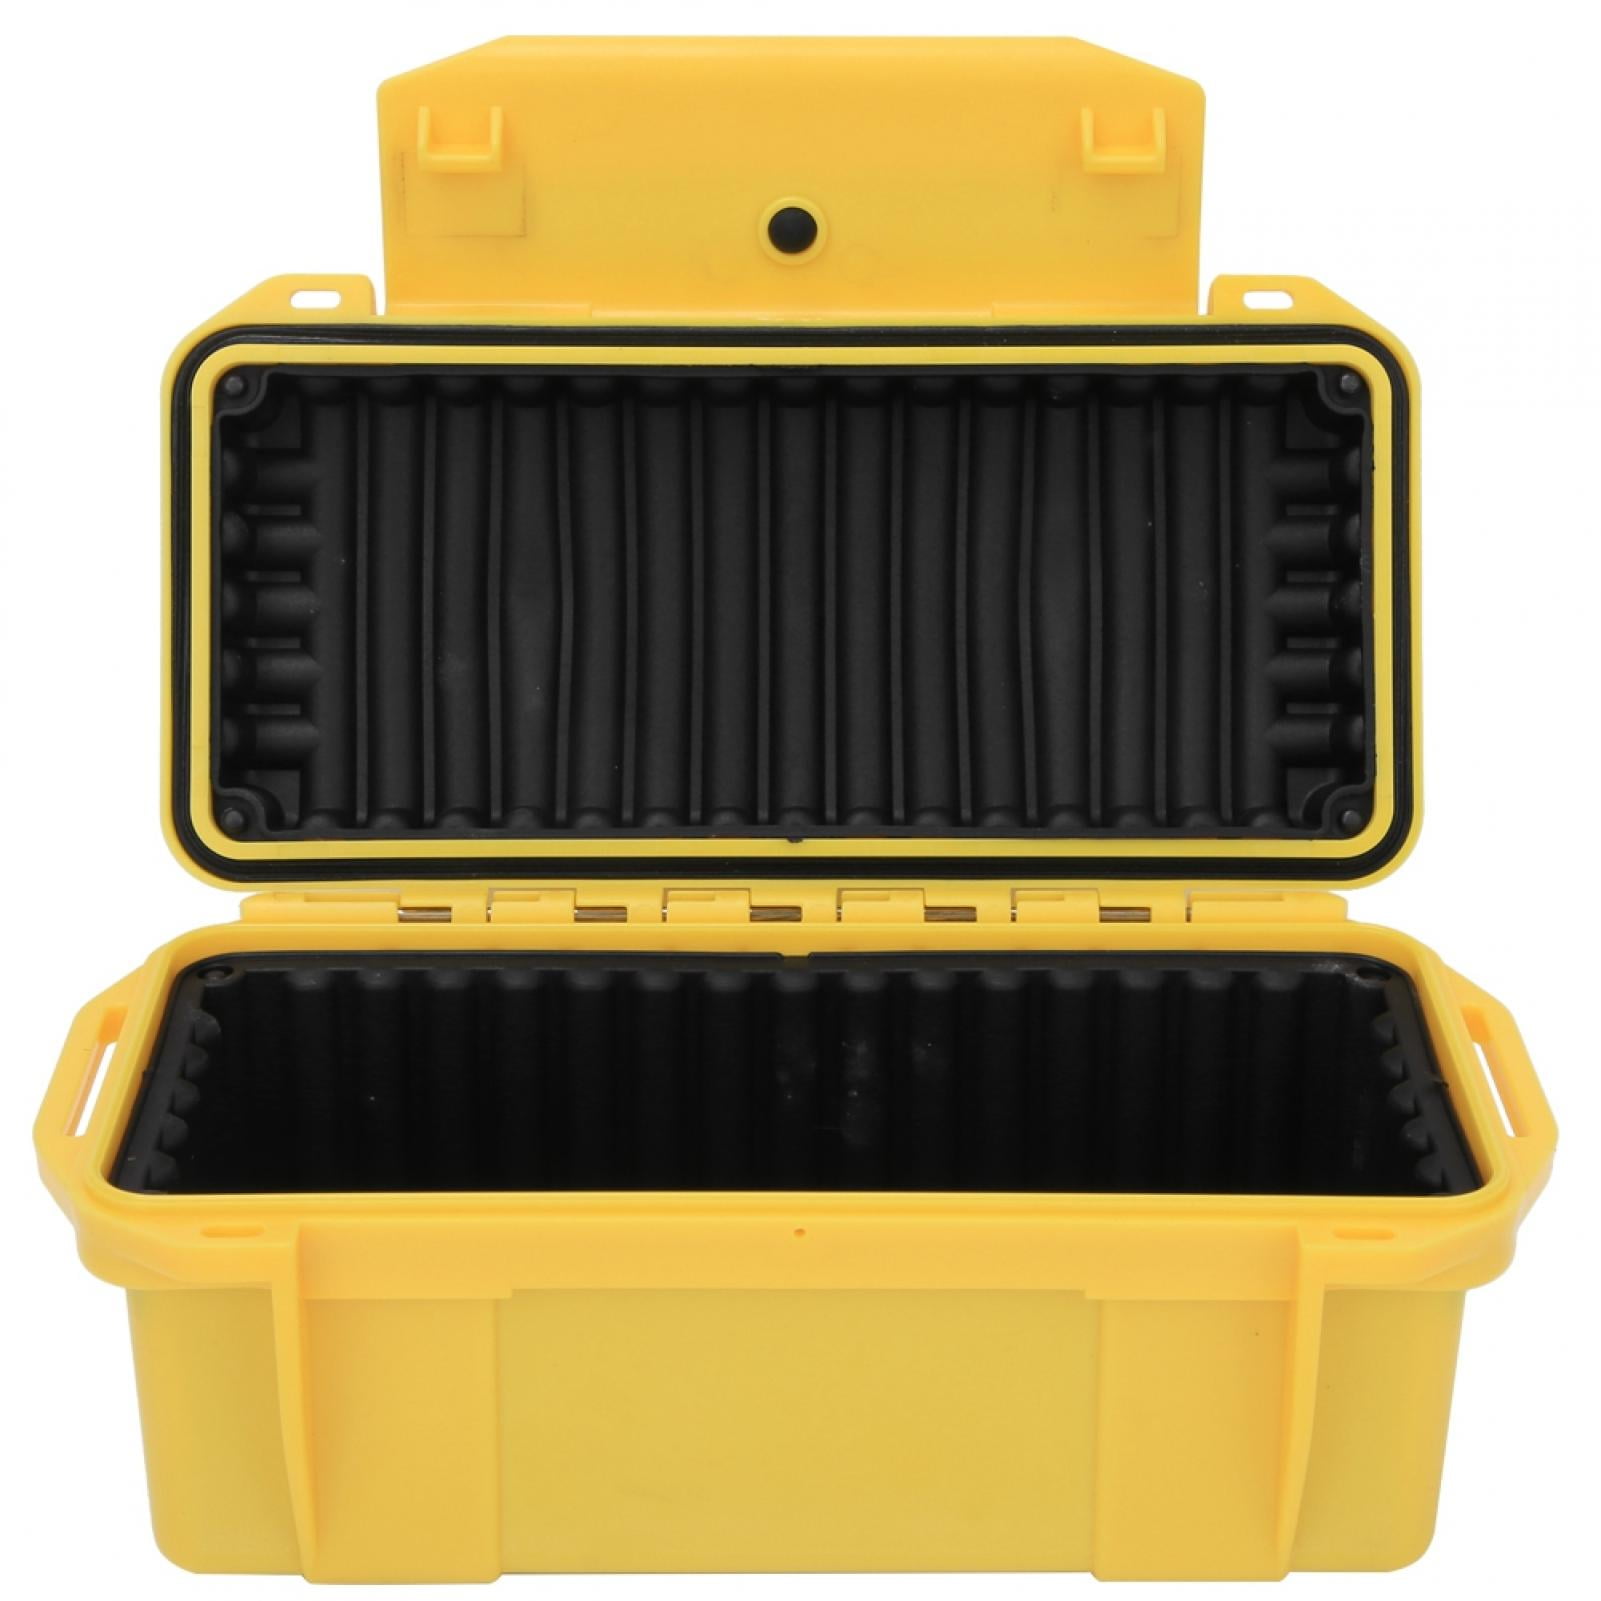 Waterproof Tool Box Safety Case Outdoor Hard Plastic Portable Storage Dry Boxes 